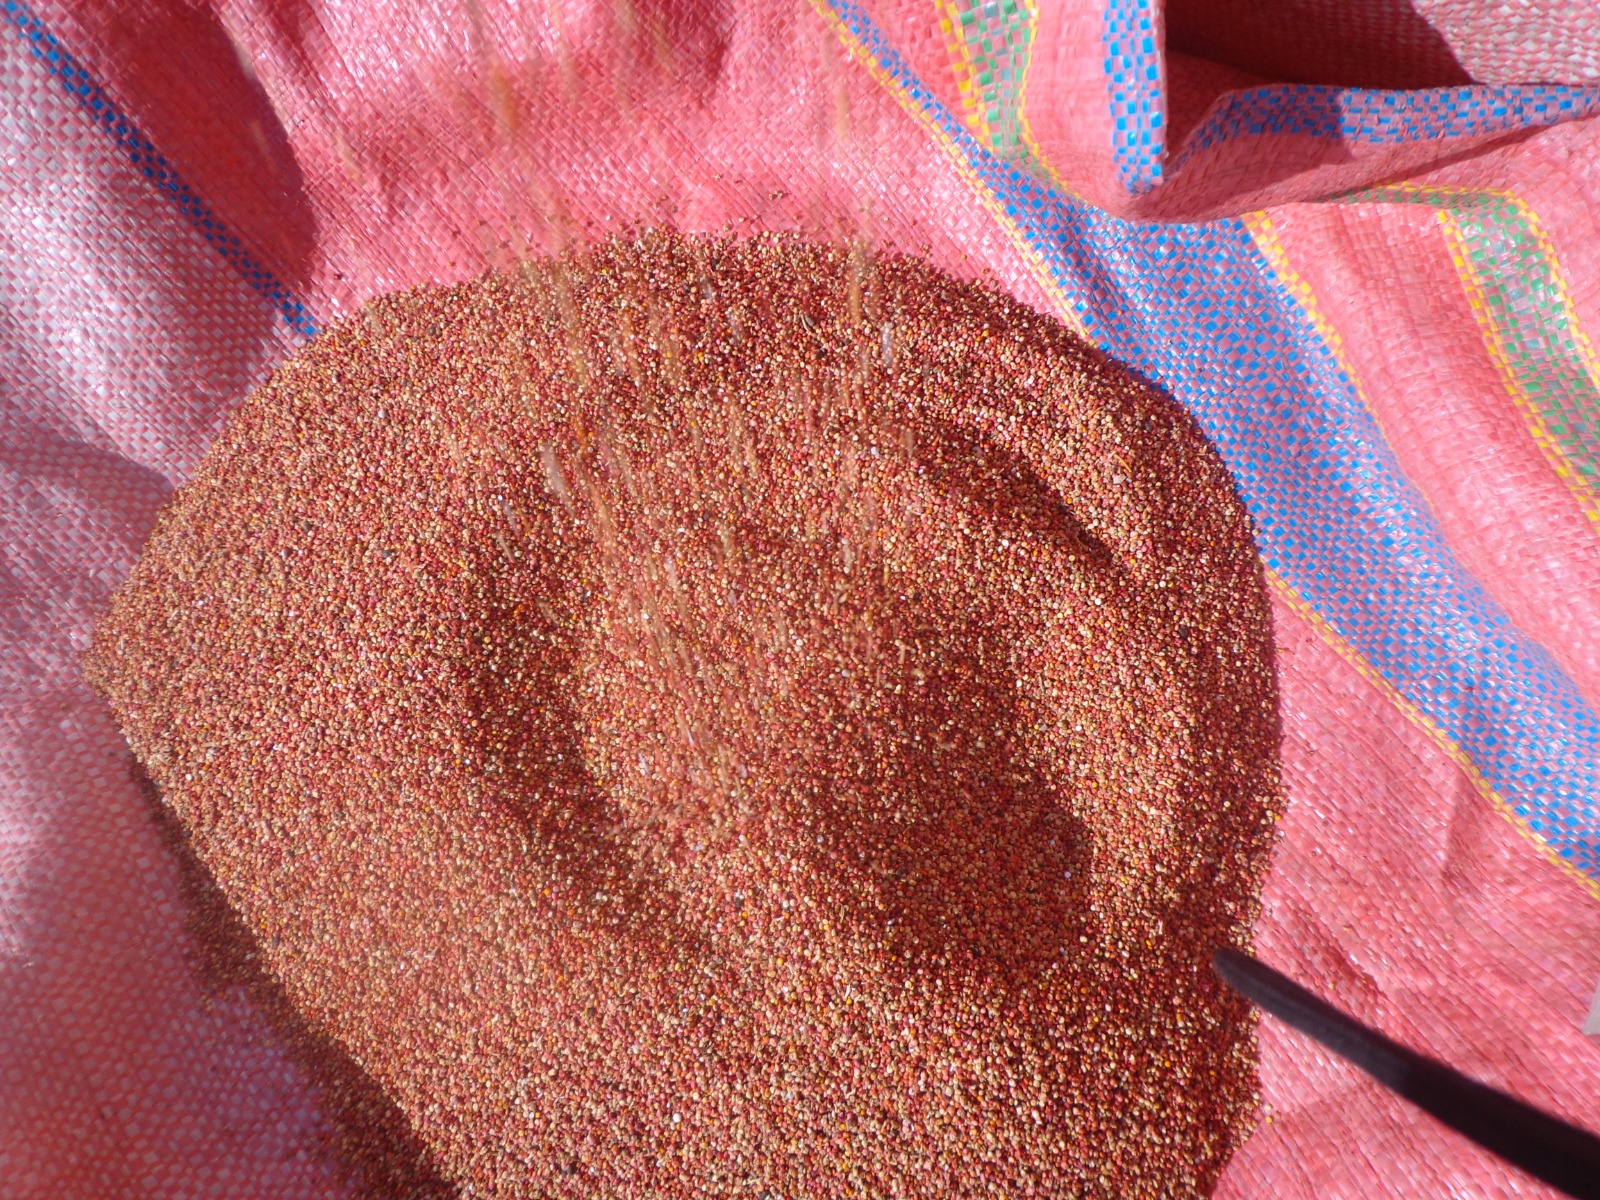 Like the orange and red varieties, yellow quinoa is ideal for making porridge (mazamorra) and kispiño.